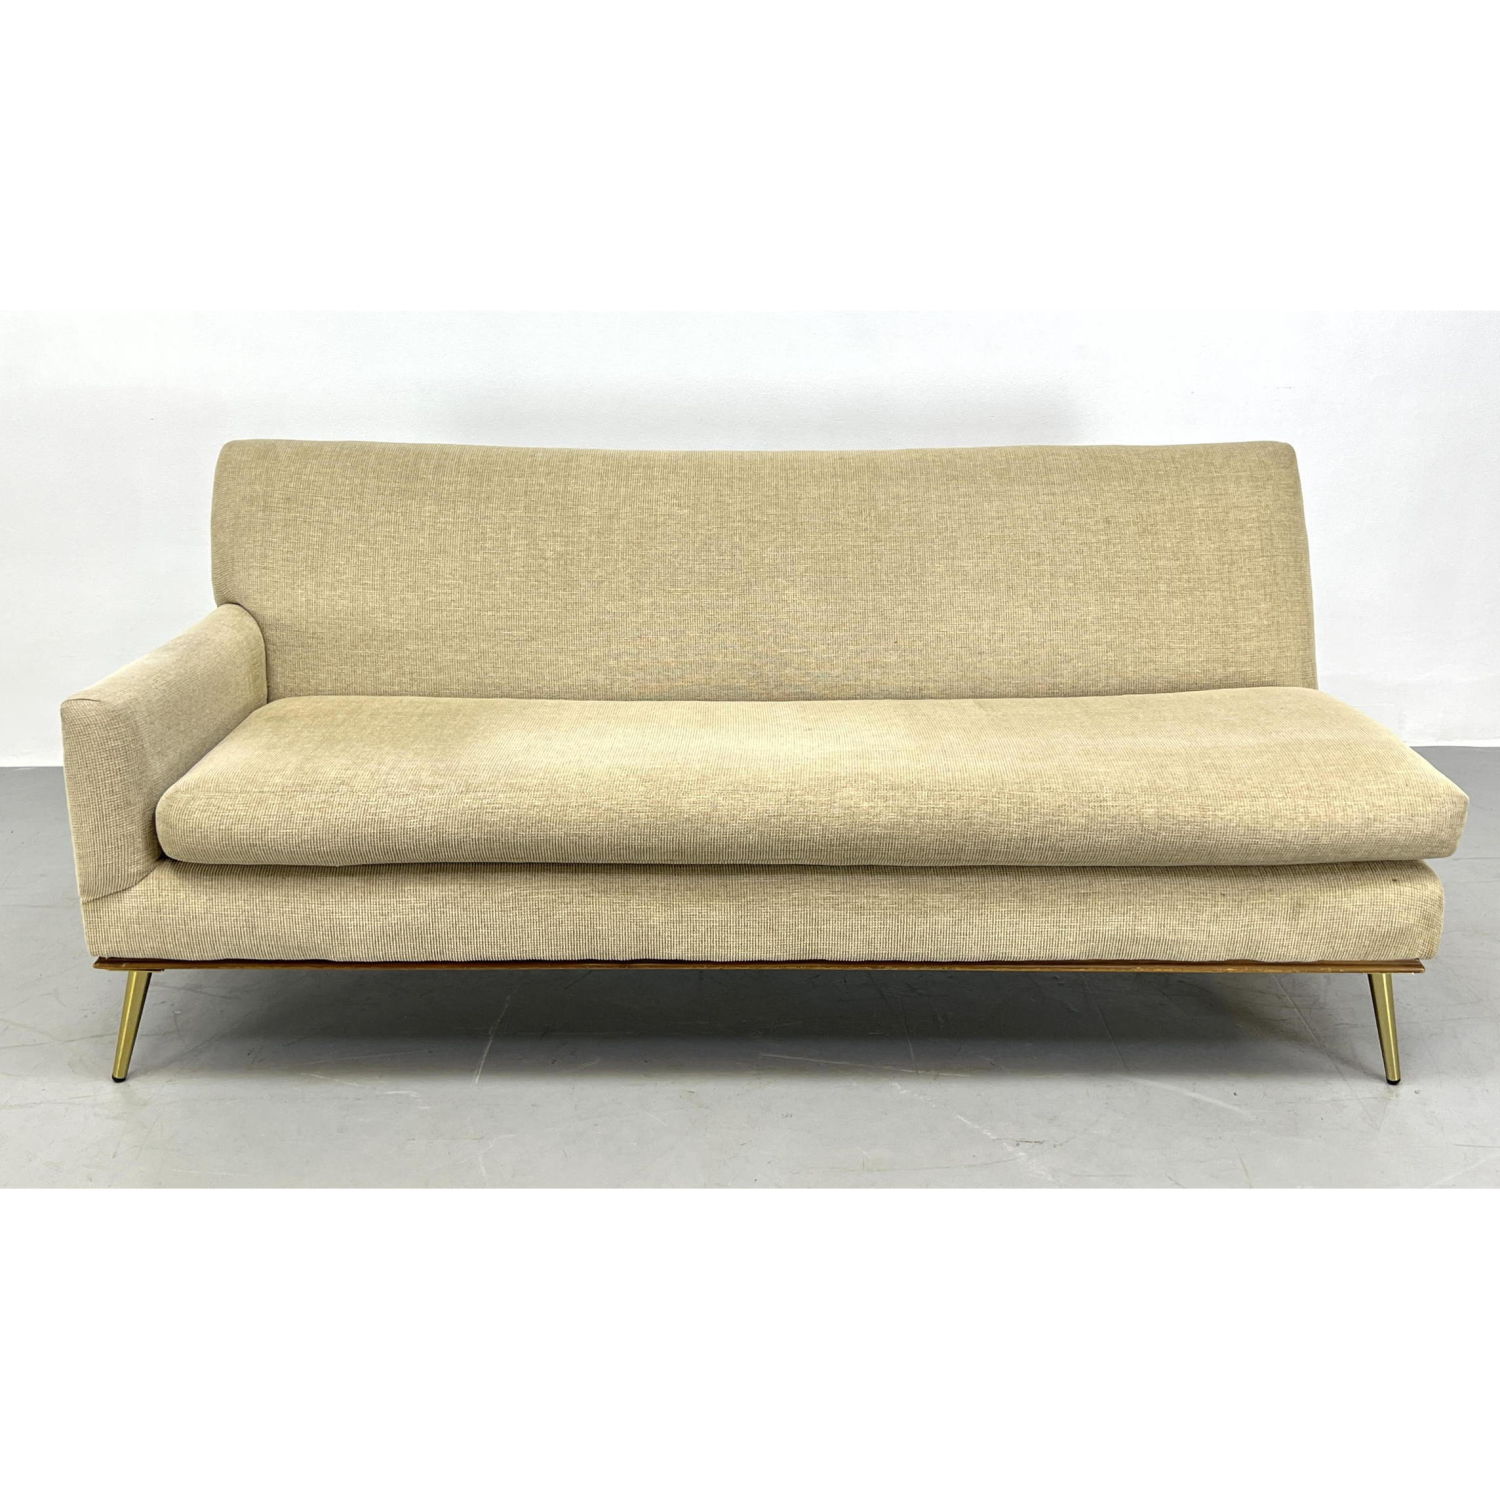 Modernist Single Arm Sofa Couch.